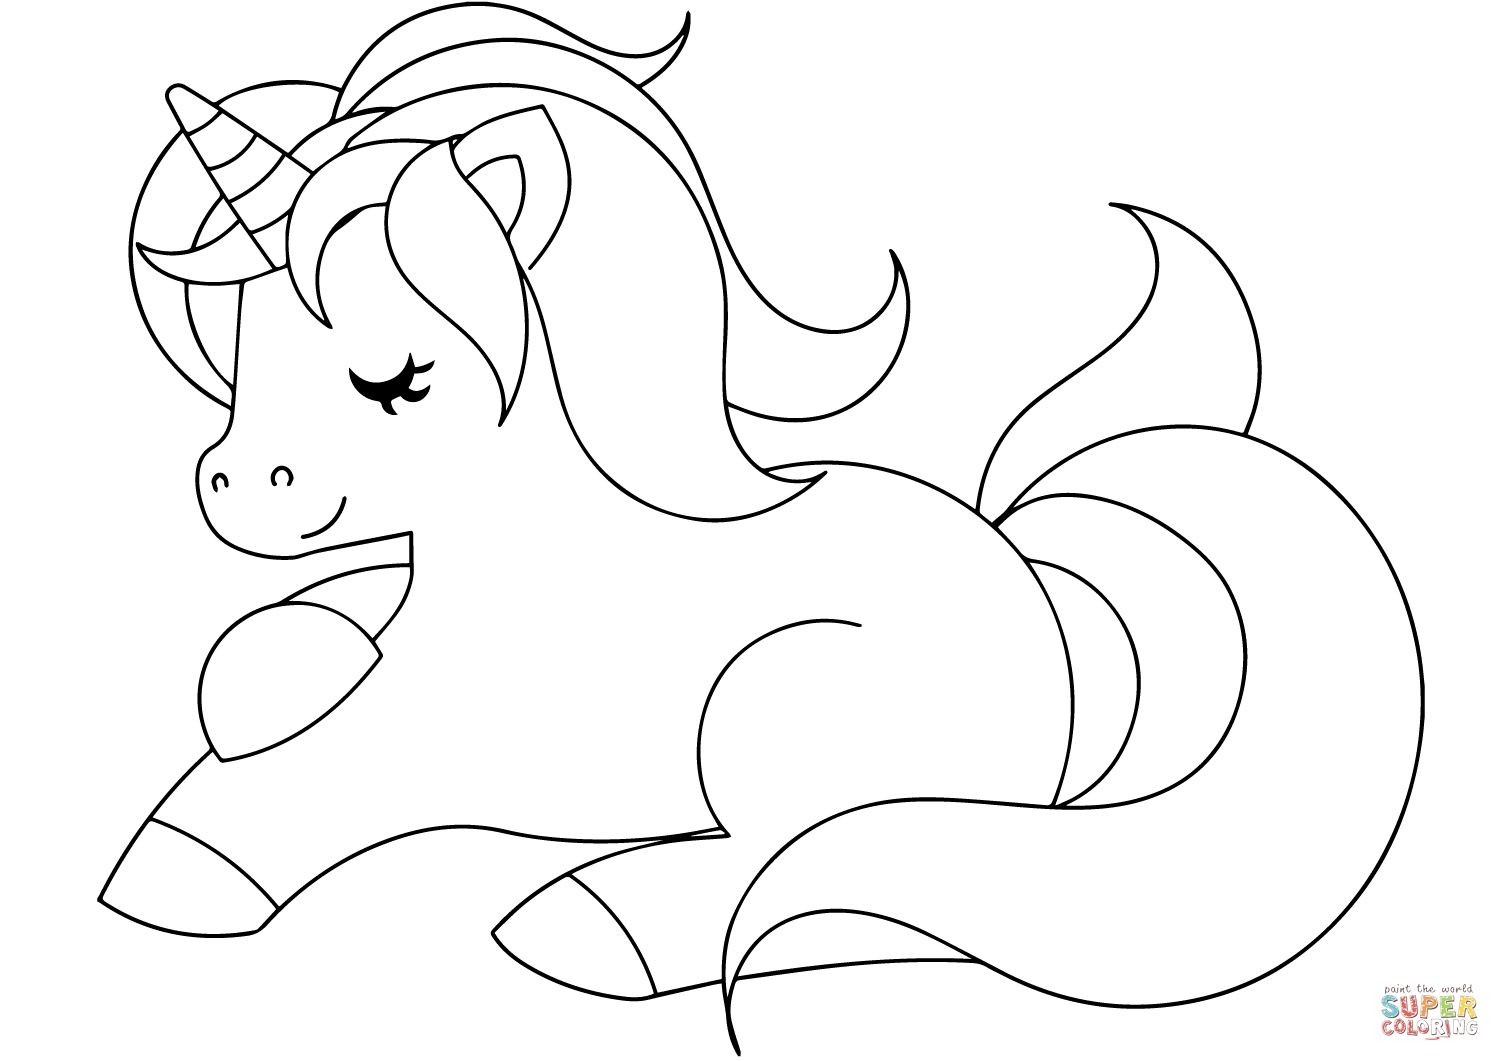 Cute Unicorn Coloring Page | Free Printable Coloring Pages With - Free Printable Unicorn Coloring Pages